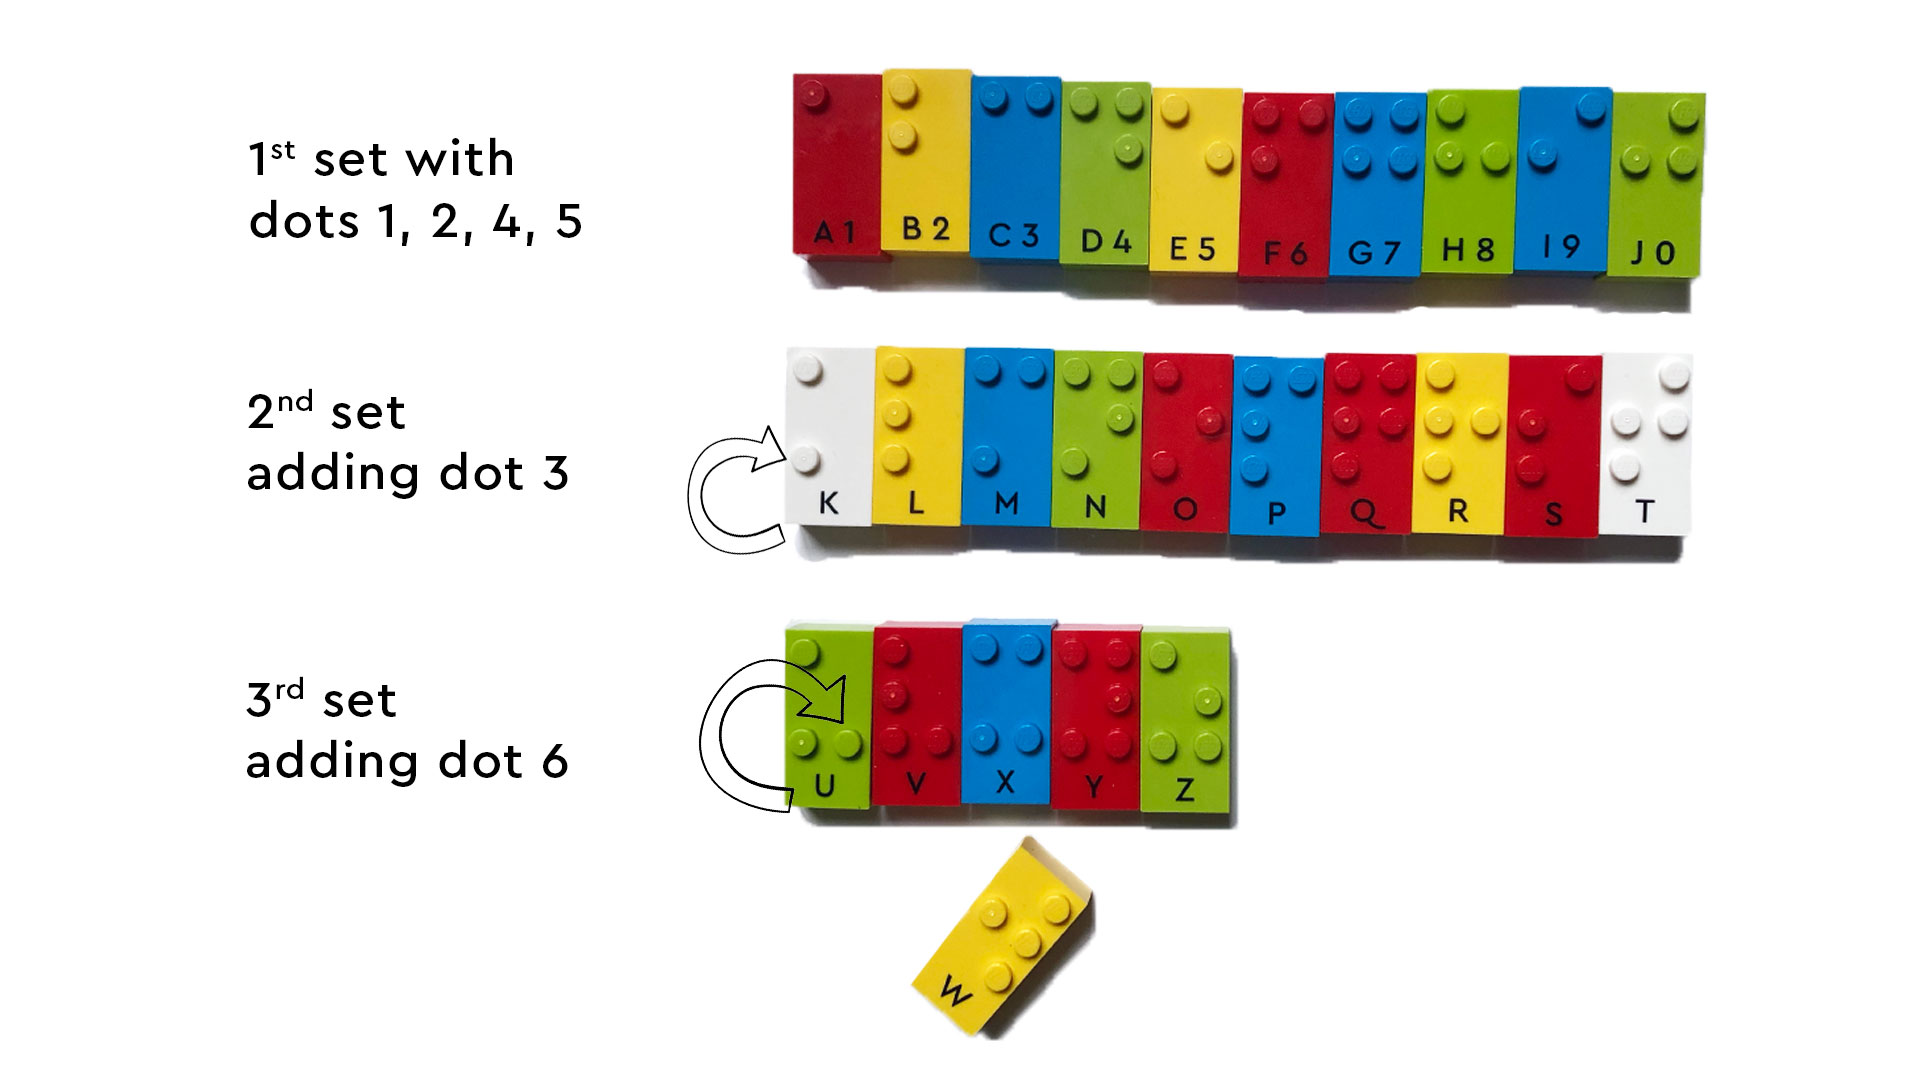 First decade of the braille alphabet with dots 1, 2, 4, 5, second decade adding dot 3, third decade adding dot 6. 